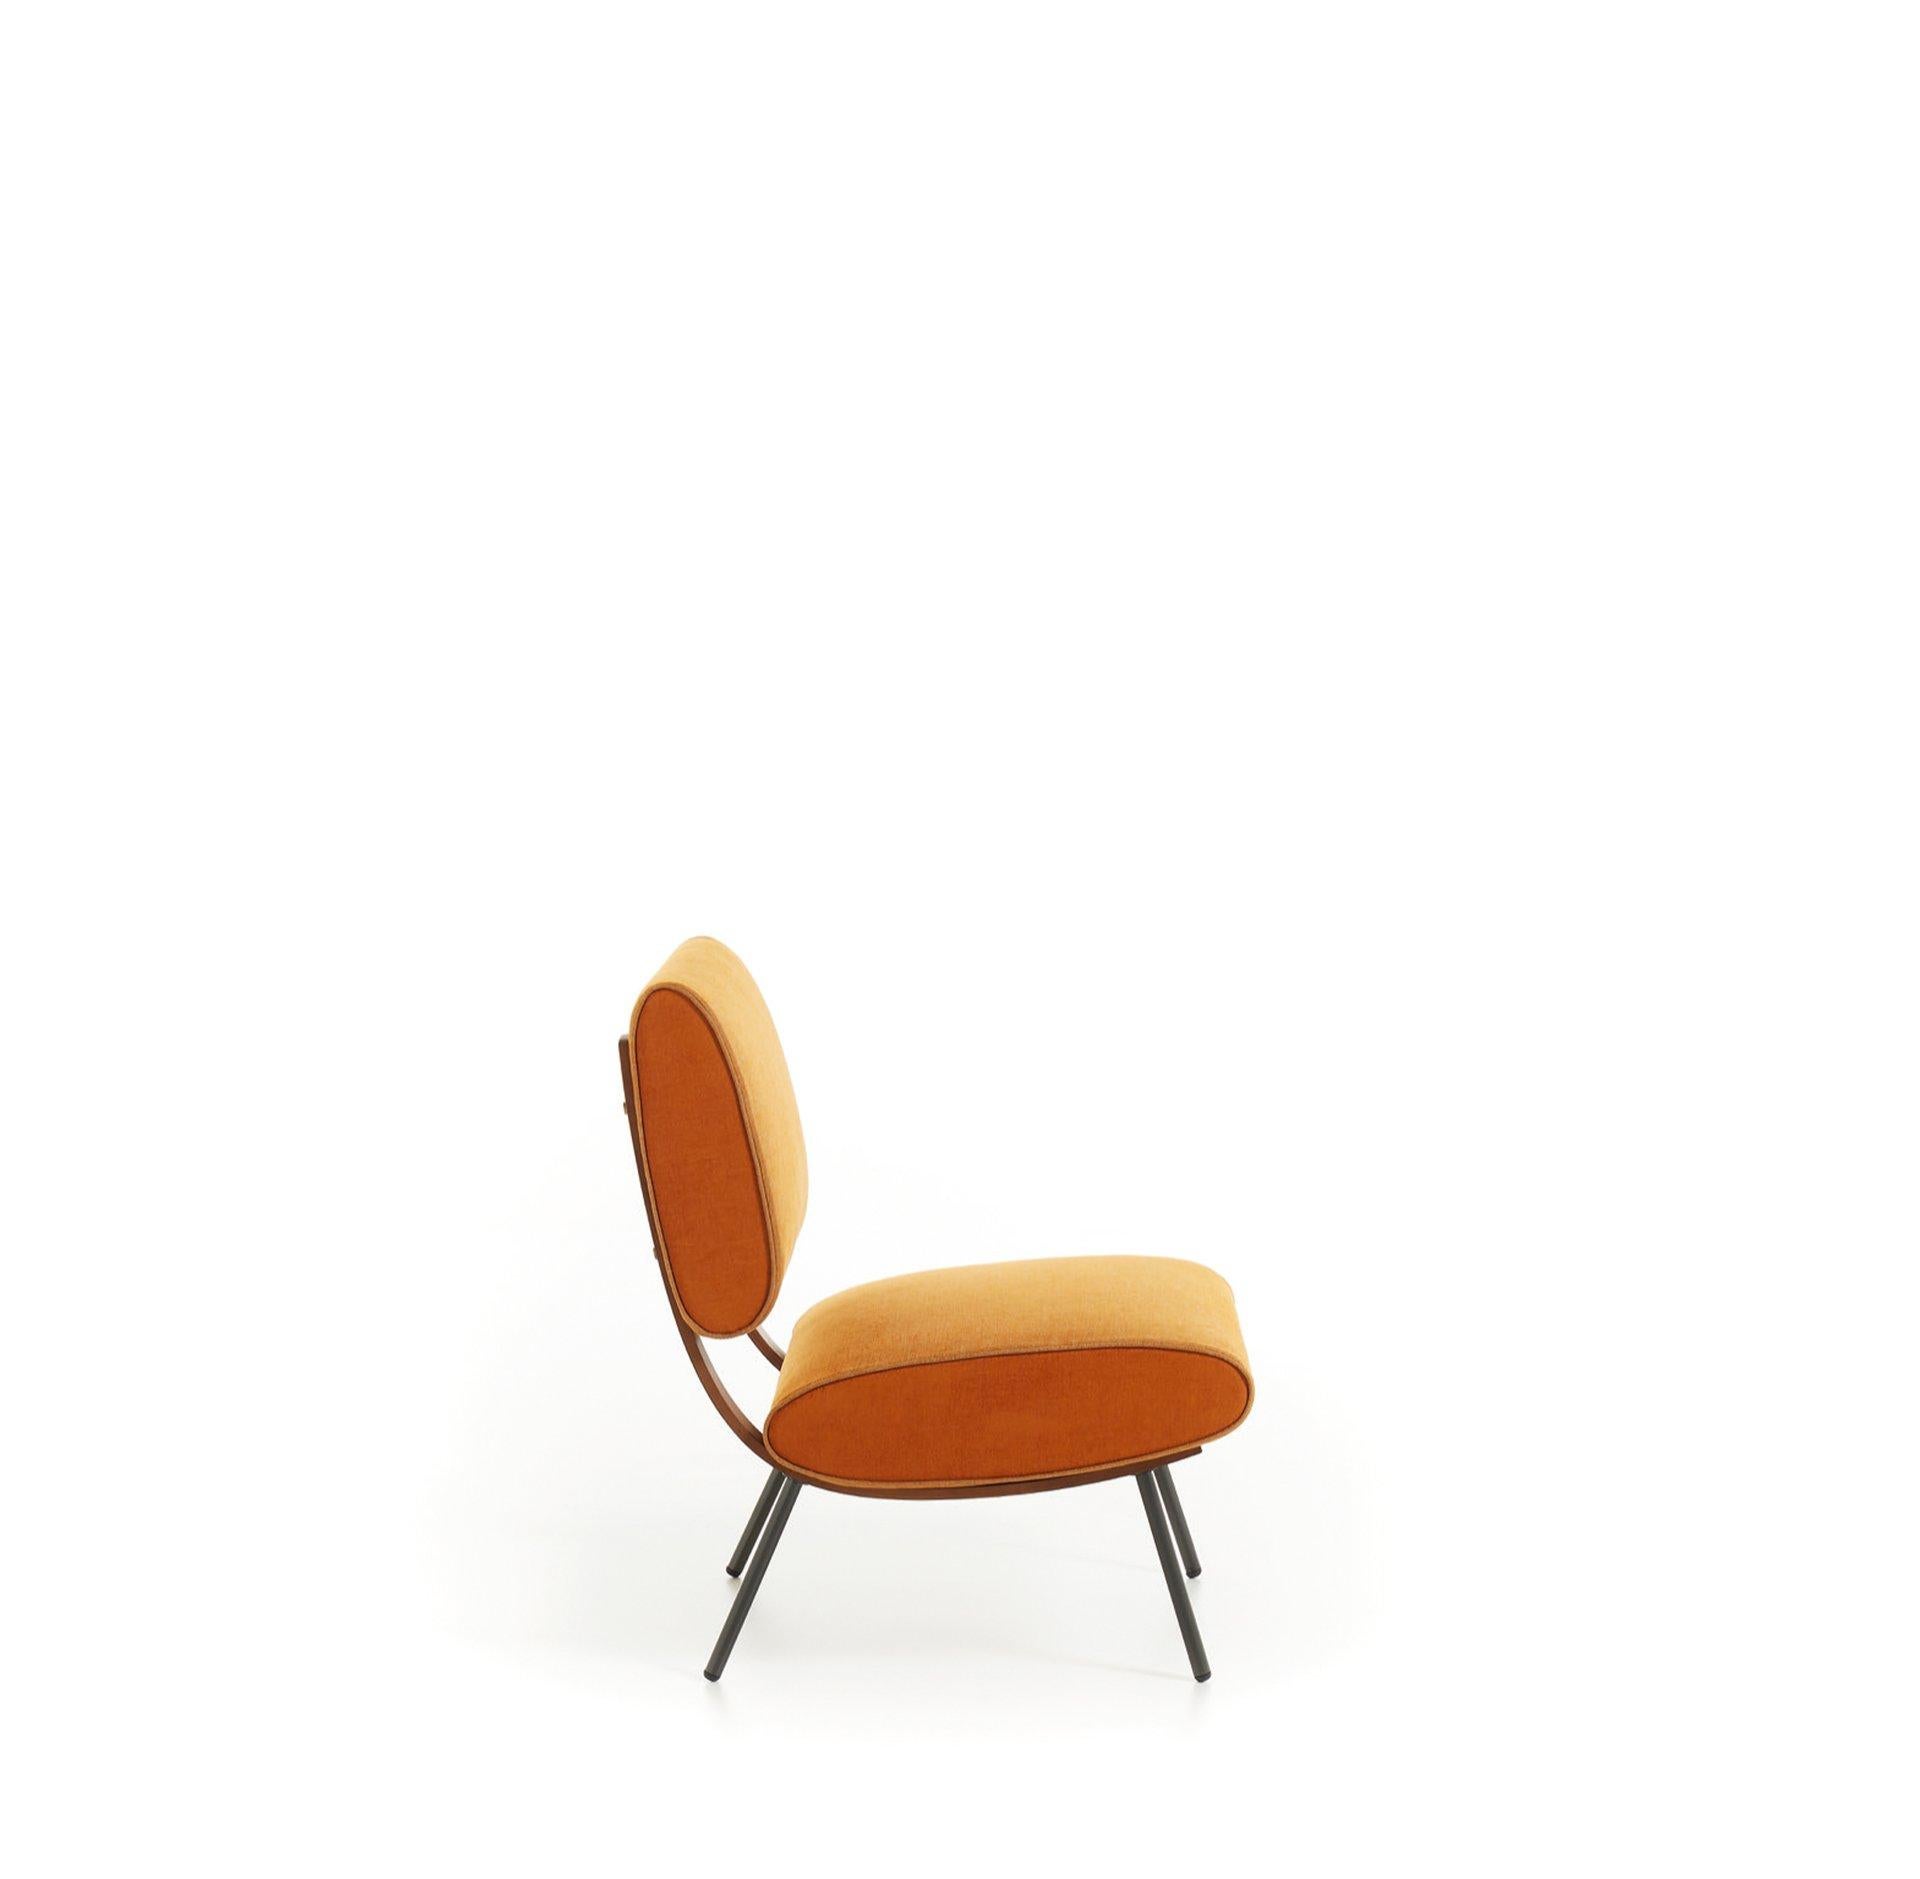 Armchair in Chenille and Brass by Gio Ponti. Expert-crafted in Italy exclusively by Molteni&C.

The end of the Second World War ushered in an era of creativity and it was no different for furniture design. This rounded chair harkens back to its